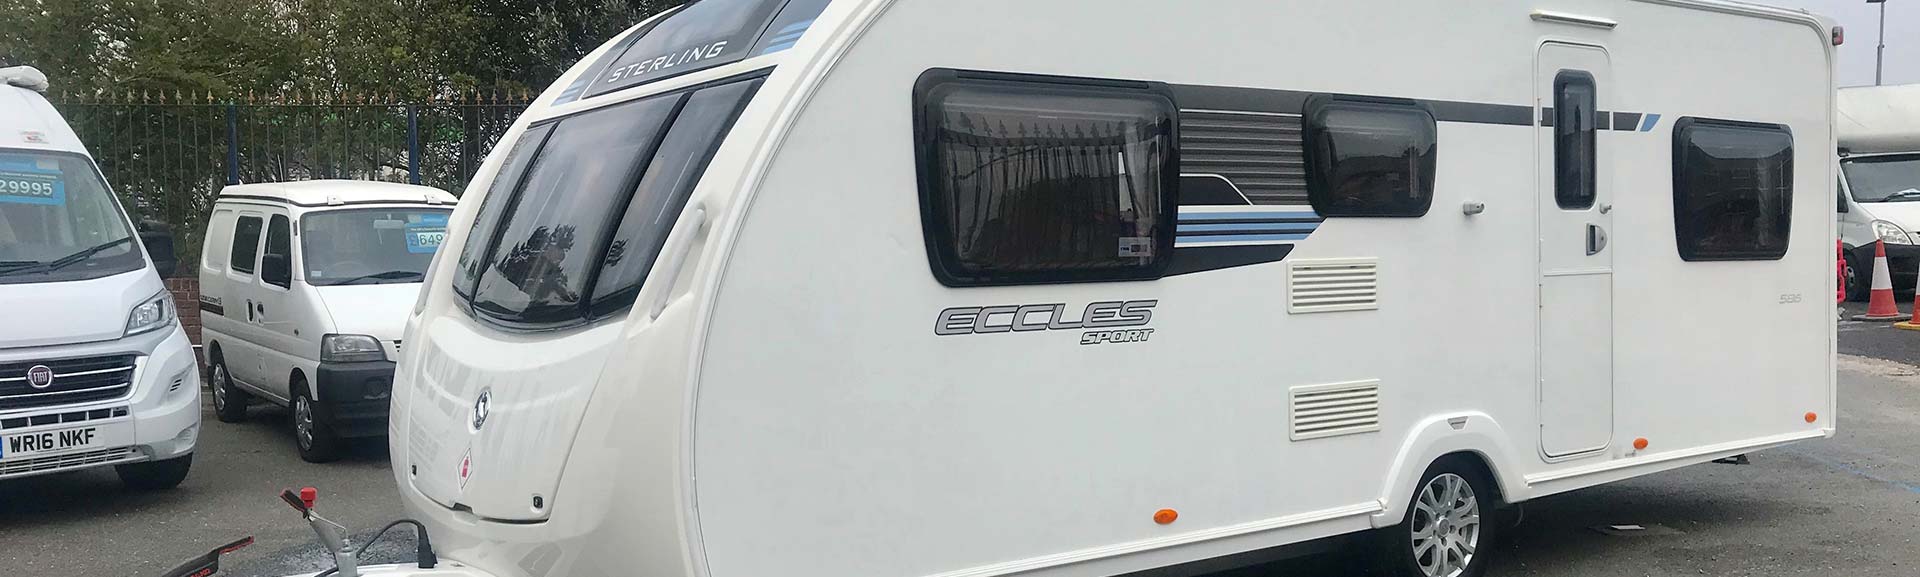 Providing top quality caravans, motorhomes and accessories to customers across the UK